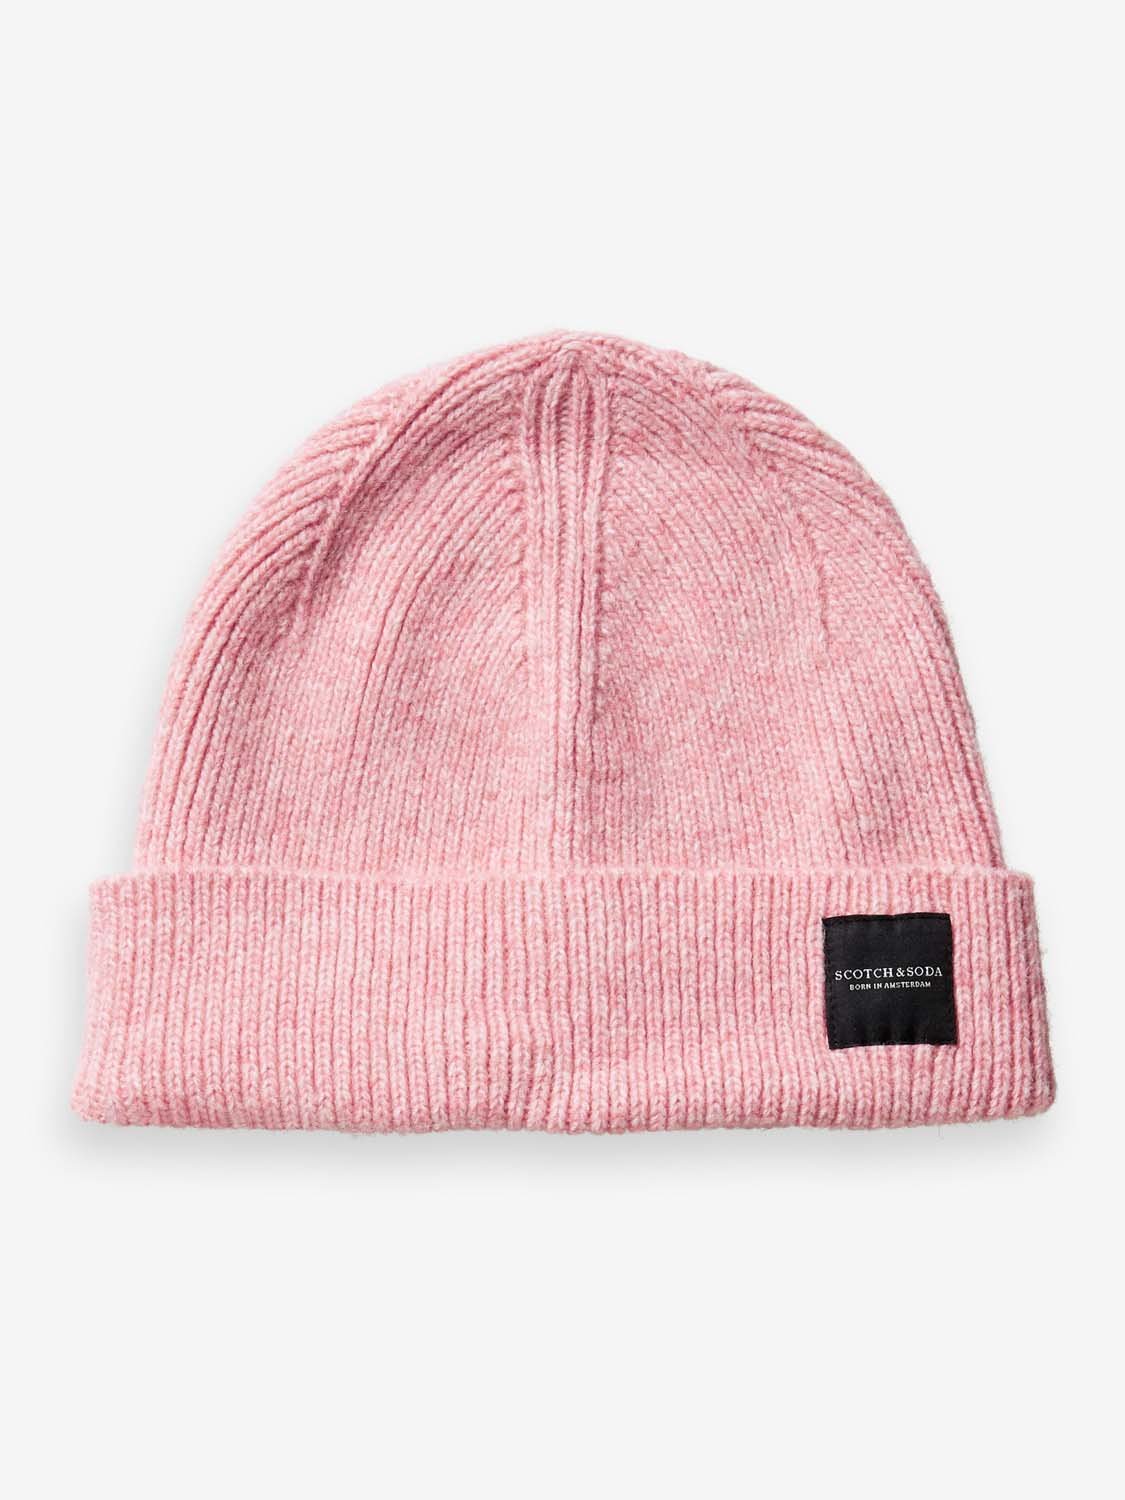 Feje guiden Gum SCOTCH AND SODA RIBBED BEANIE IN DK PINK | THE BLUEPRINT